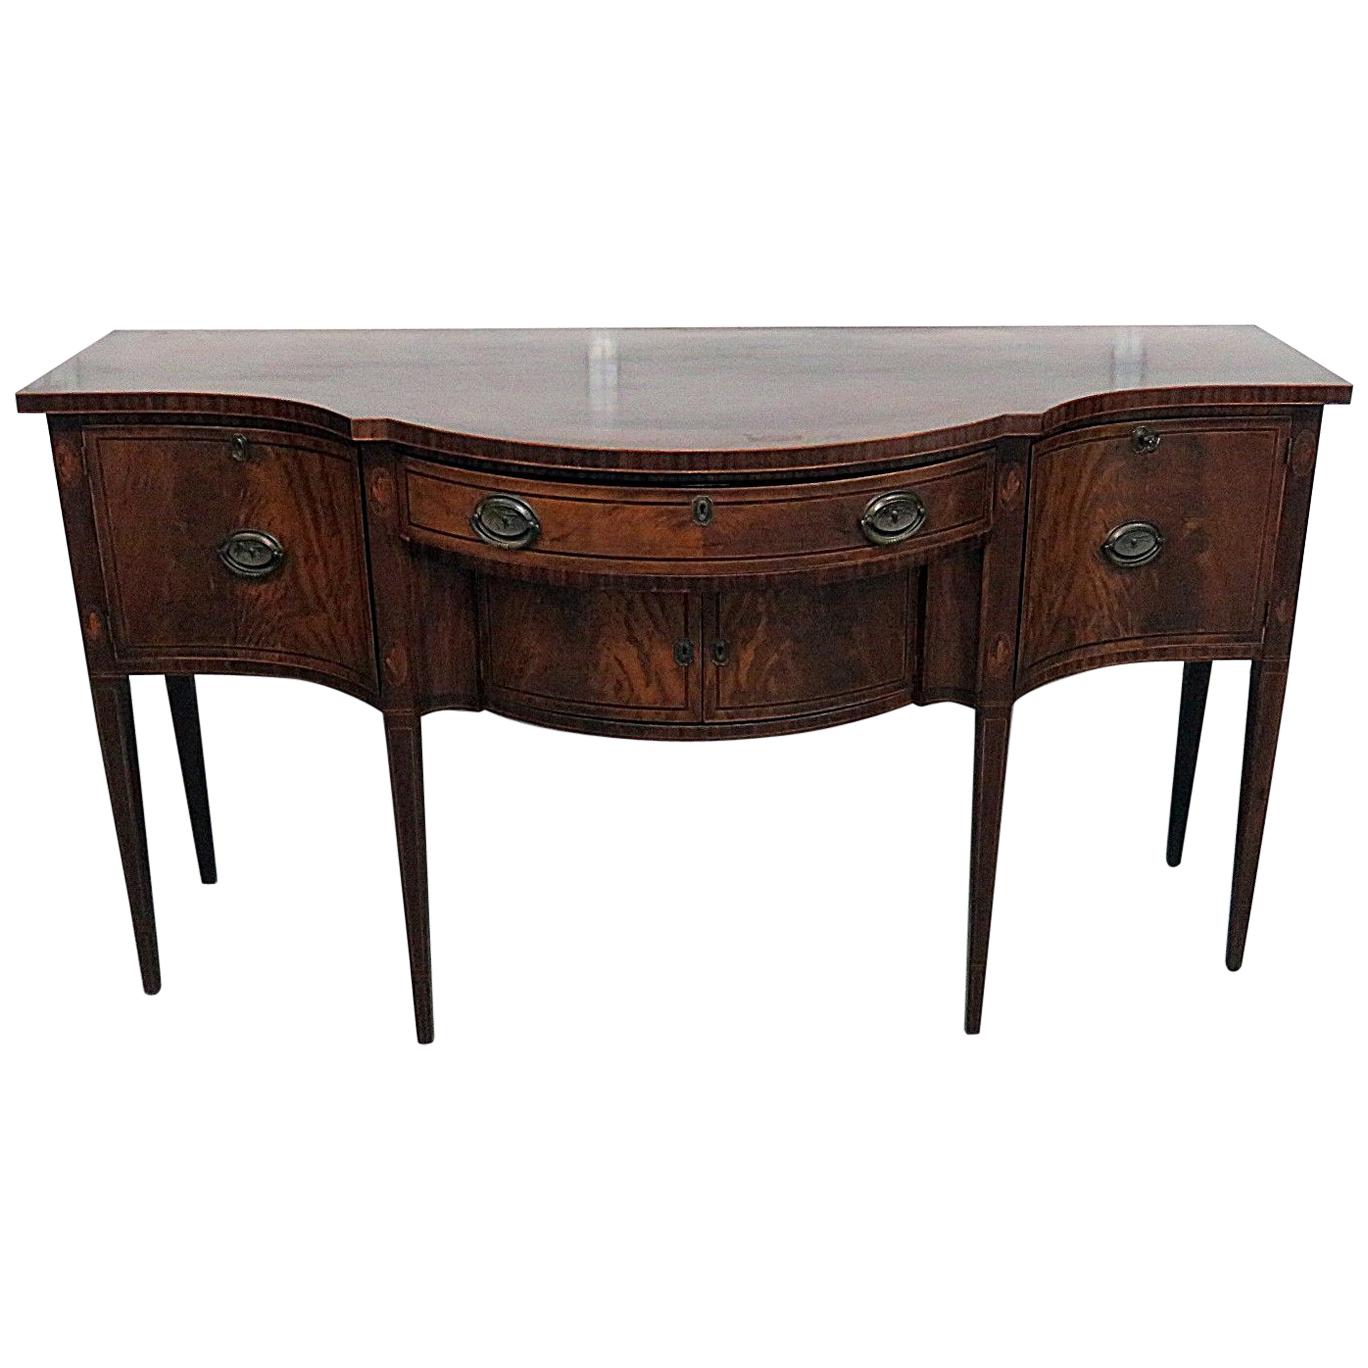 Flame Mahogany Sheraton Style Federal Sideboard Server Buffet with Eagles